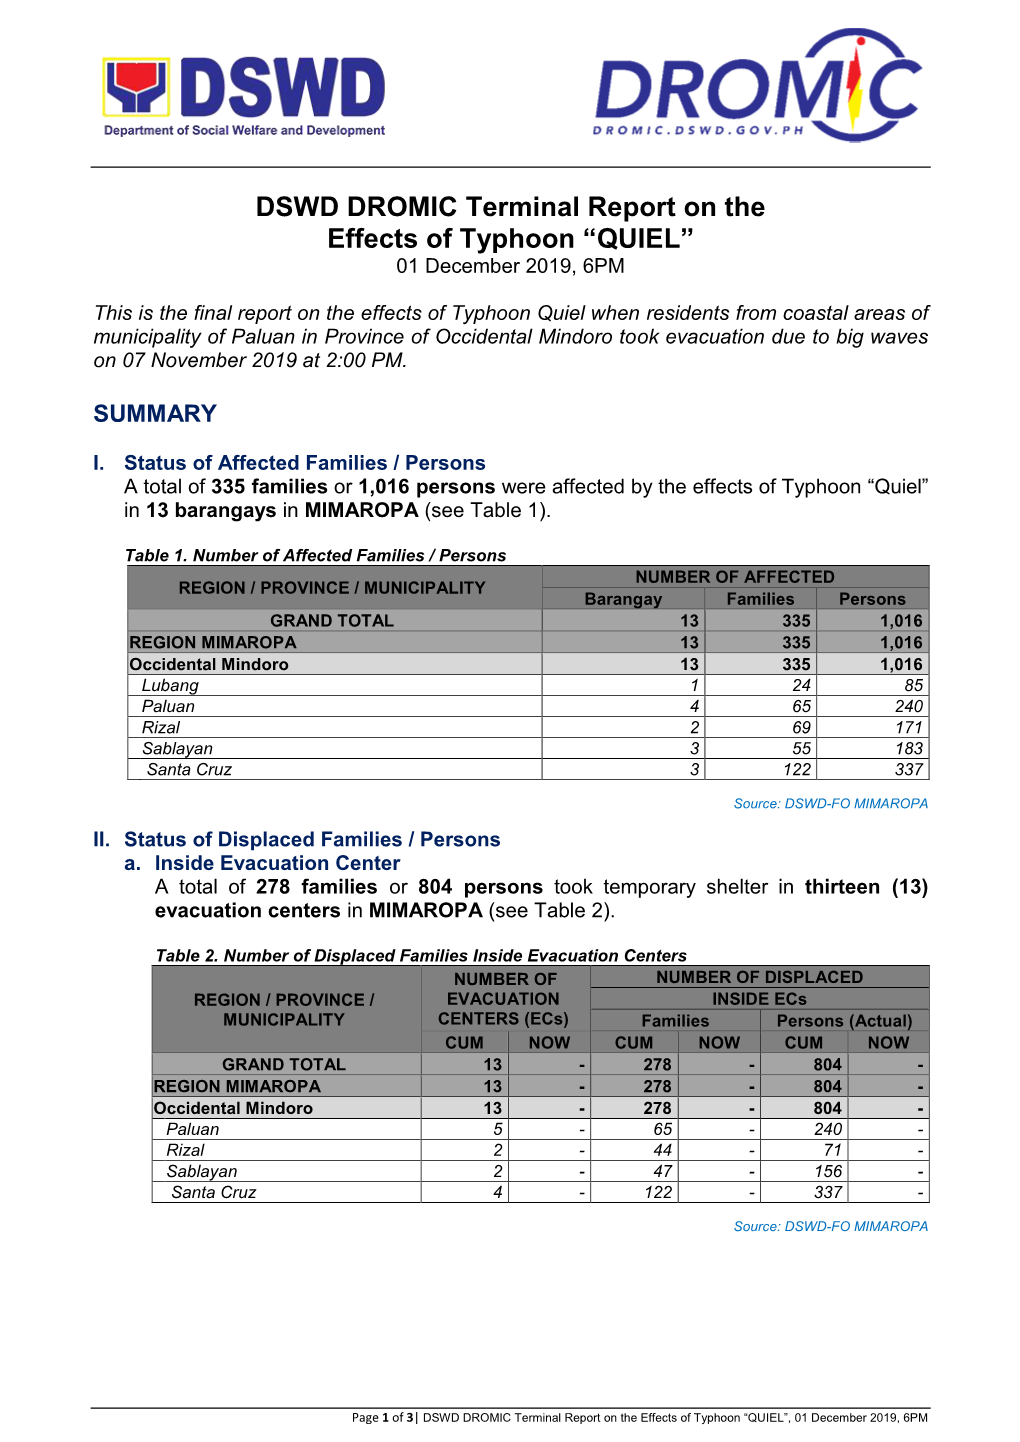 DSWD DROMIC Terminal Report on the Effects of Typhoon “QUIEL” 01 December 2019, 6PM